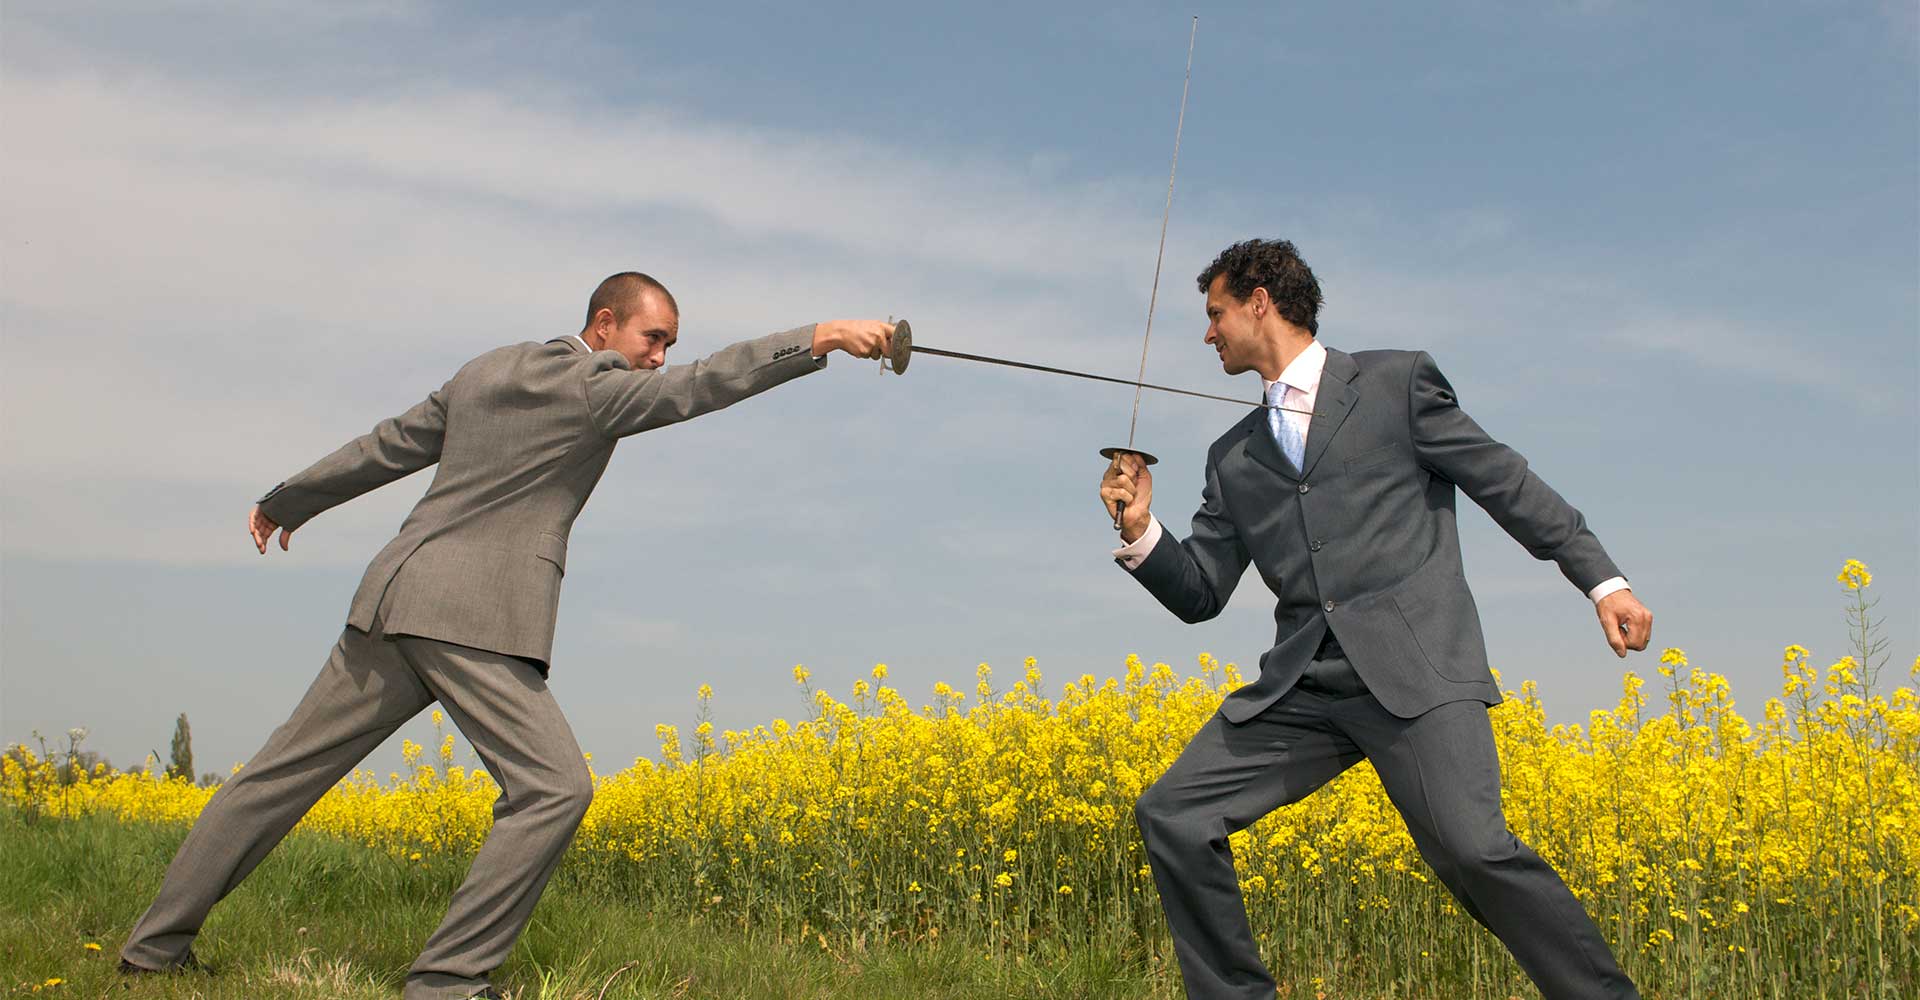 Two men in suits fencing